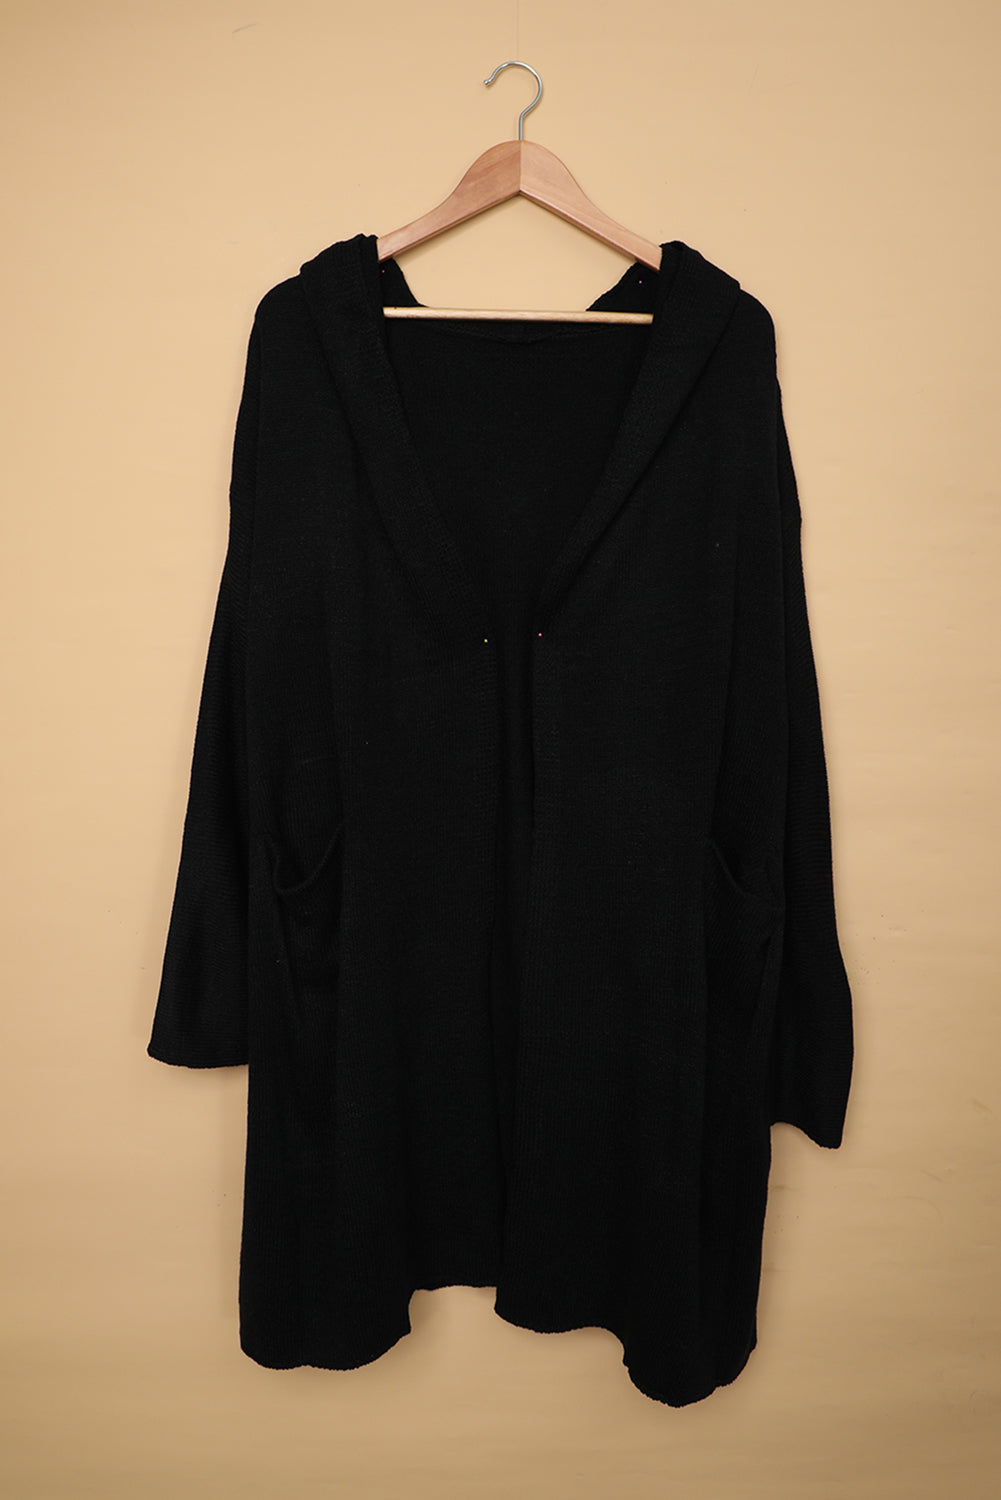 Winter Casual Black Open Front Hooded Sweater Cardigan